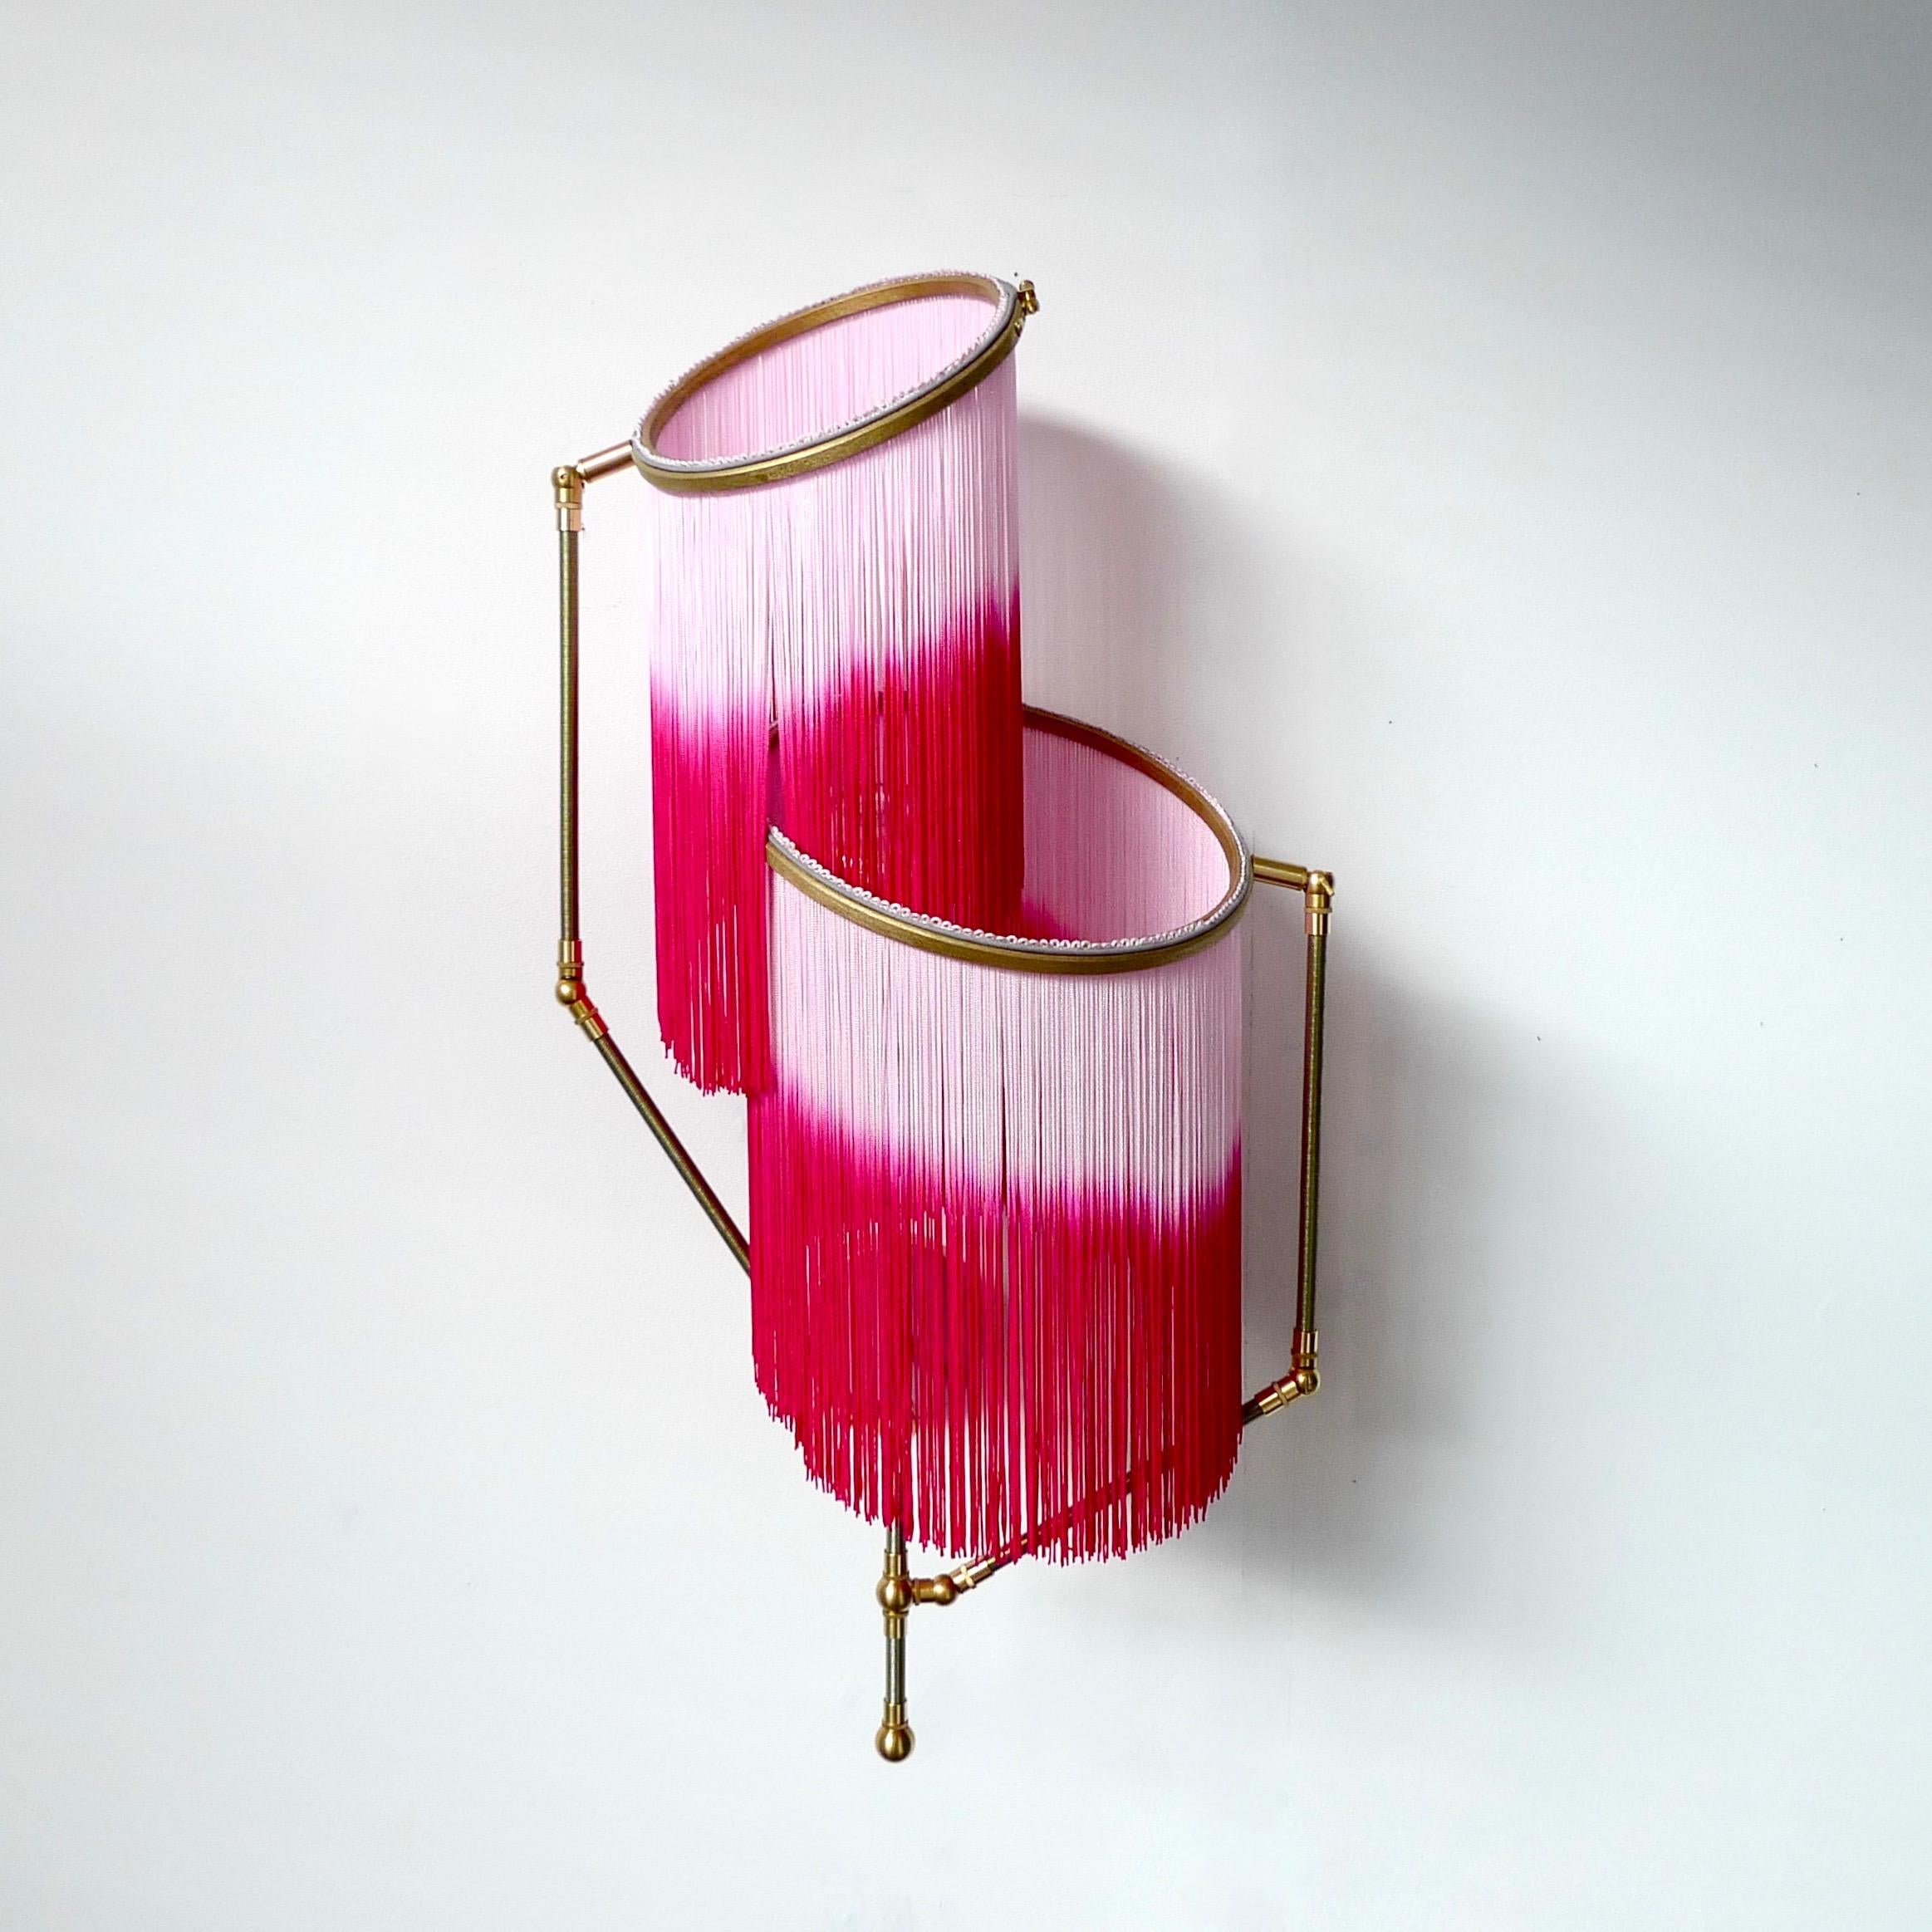 Pink charmed sconce lamp, Sander Bottinga

Dimensions: 50 x W 38 x D 27 cm
Handmade in brass, leather, wood and dip dyed colored Fringes in viscose.
The movable arms makes it possible to move the circles with fringes in different positions.
So